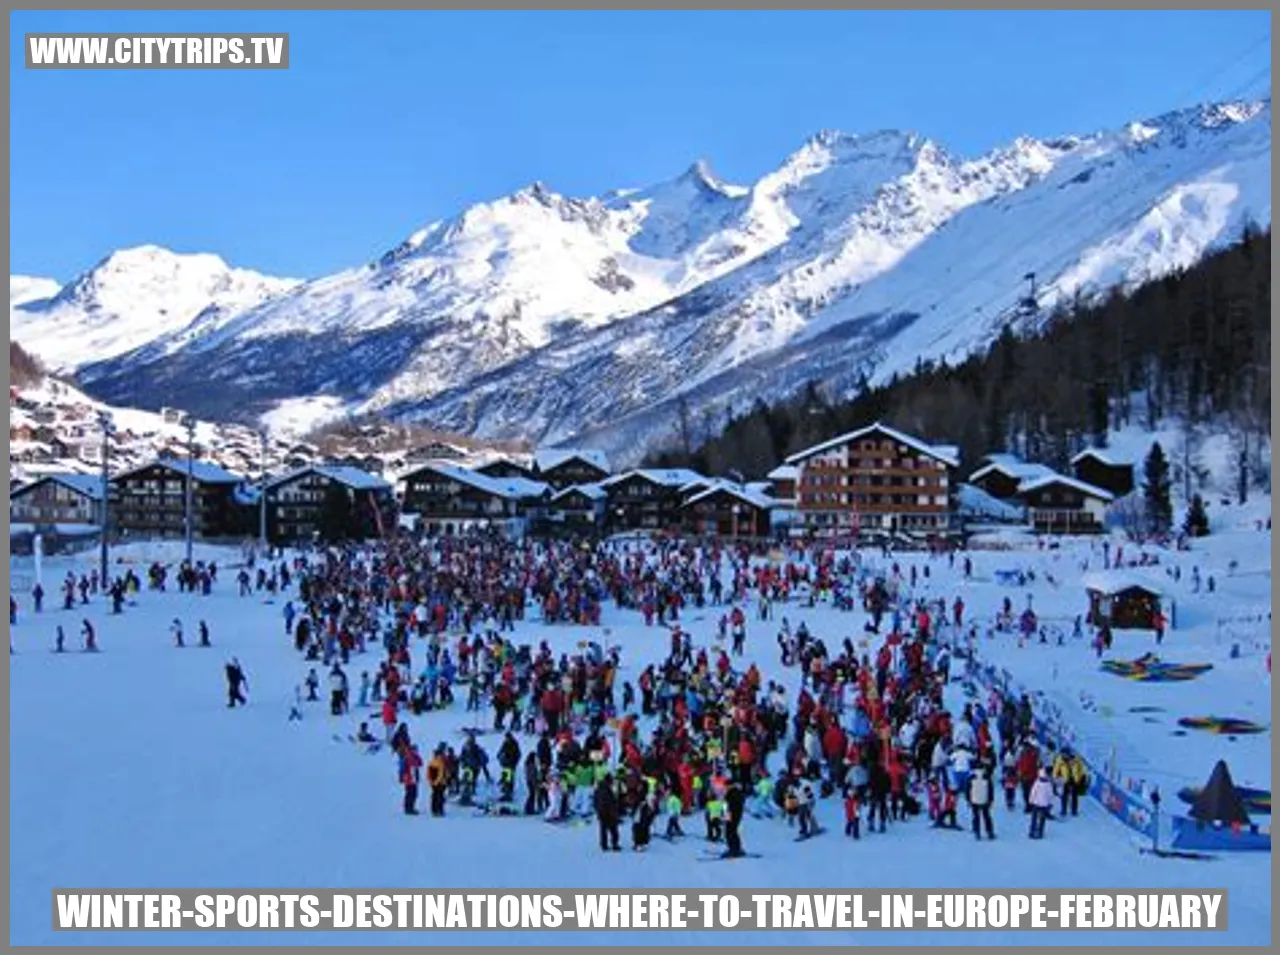 Winter Sports Destinations - Where to Travel in Europe in February